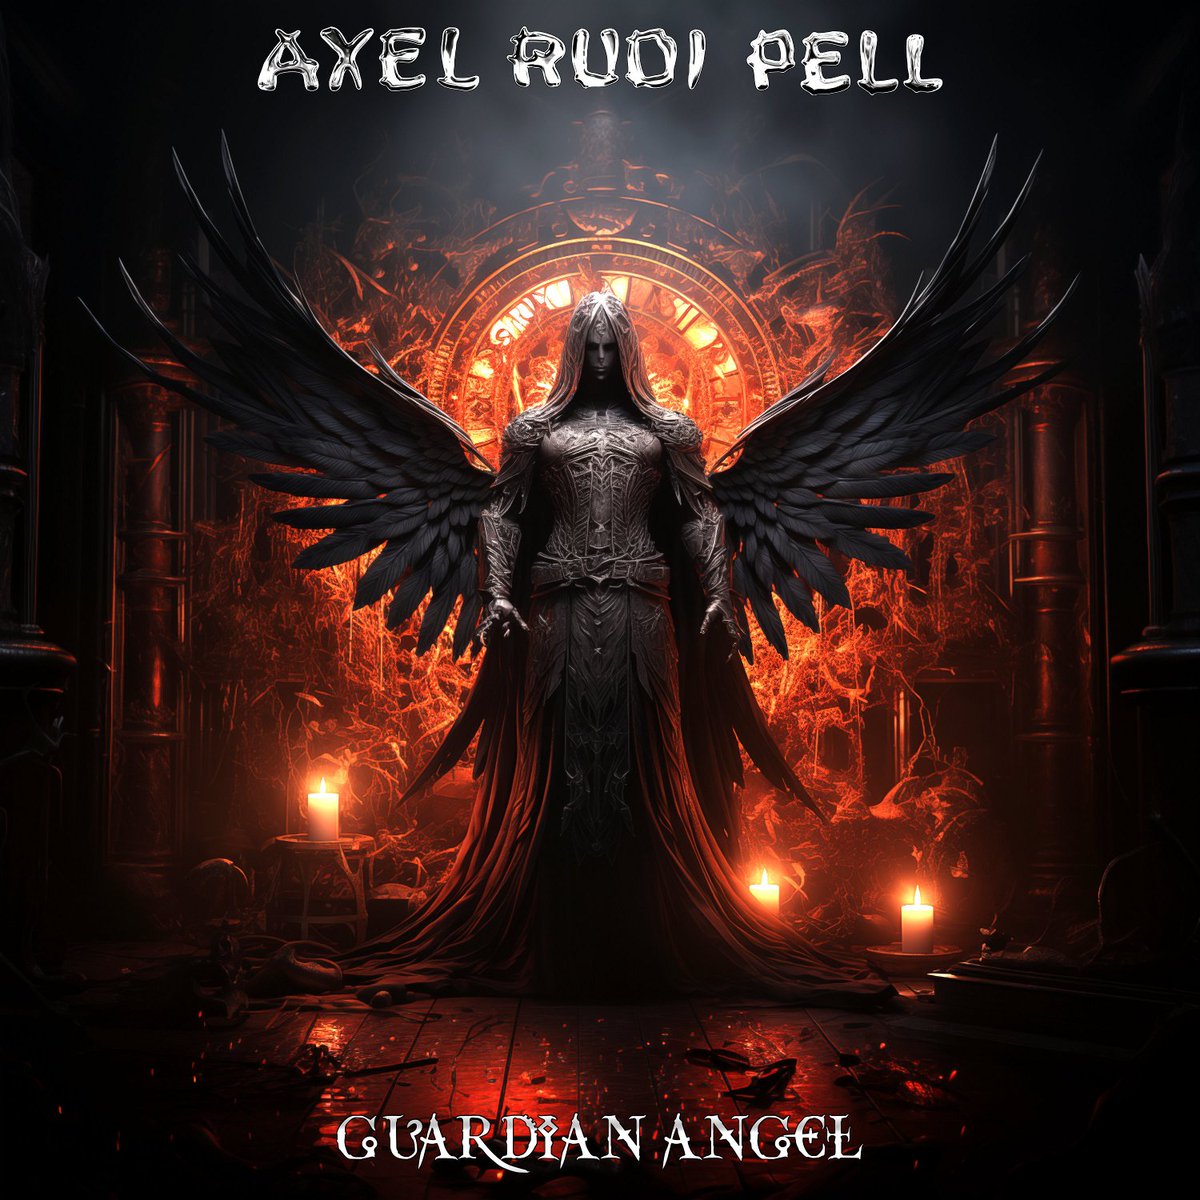 AXEL RUDI PELL (Heavy Metal Guitarist - Germany) - Releases 'Guardian Angel' Official Music Video via Steamhammer / SPV Entertainment #AxelRudiPell

wp.me/p9NC0l-hnI